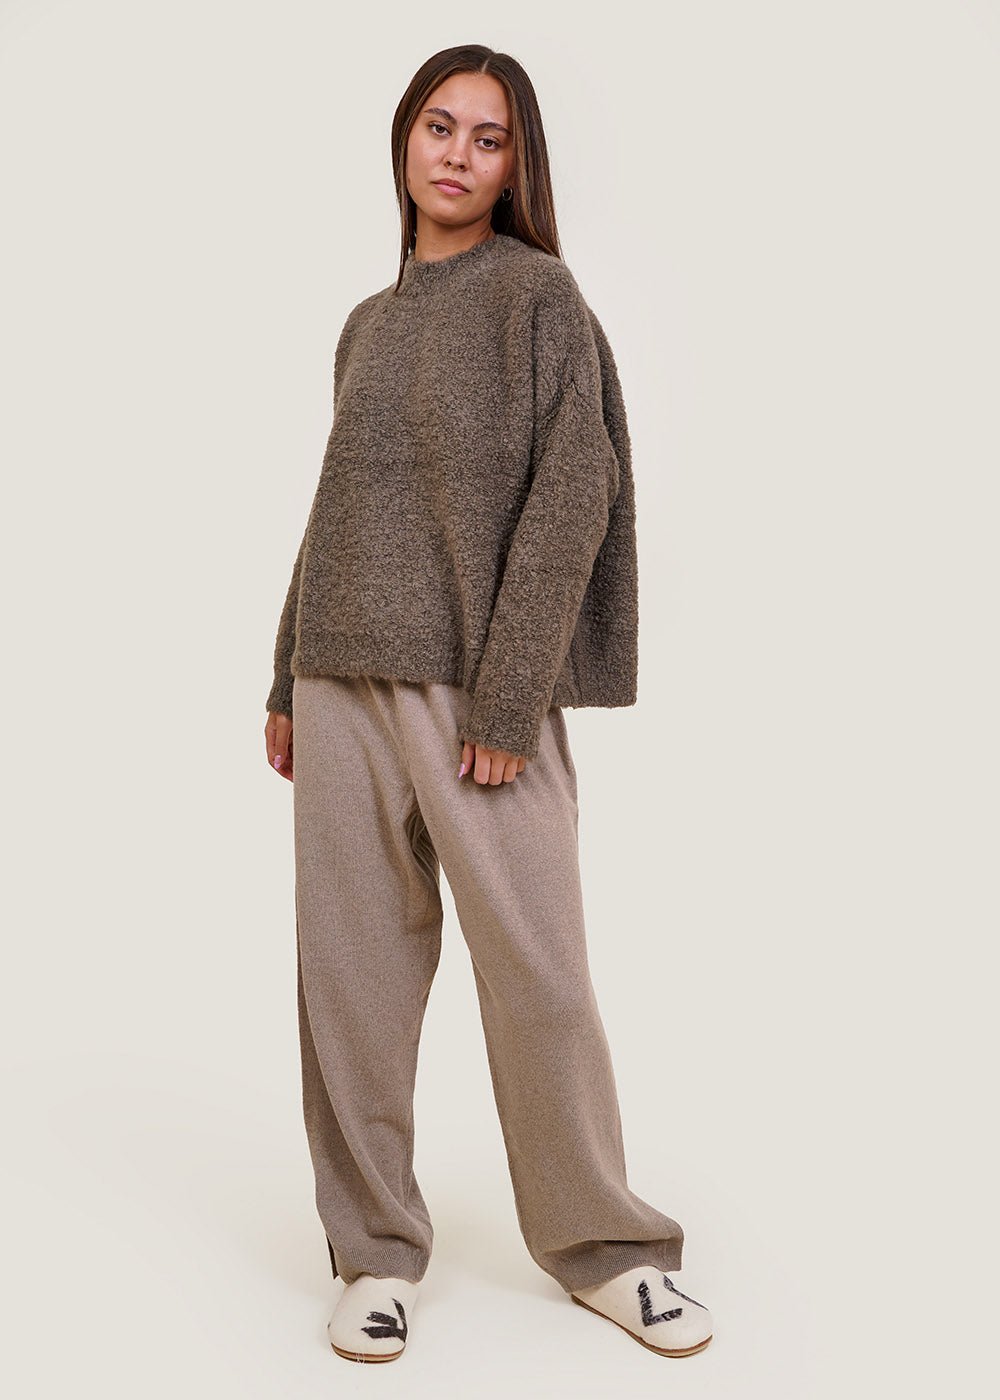 Cordera Taupe Cashmere Knit Pants - New Classics Studios Sustainable Ethical Fashion Canada